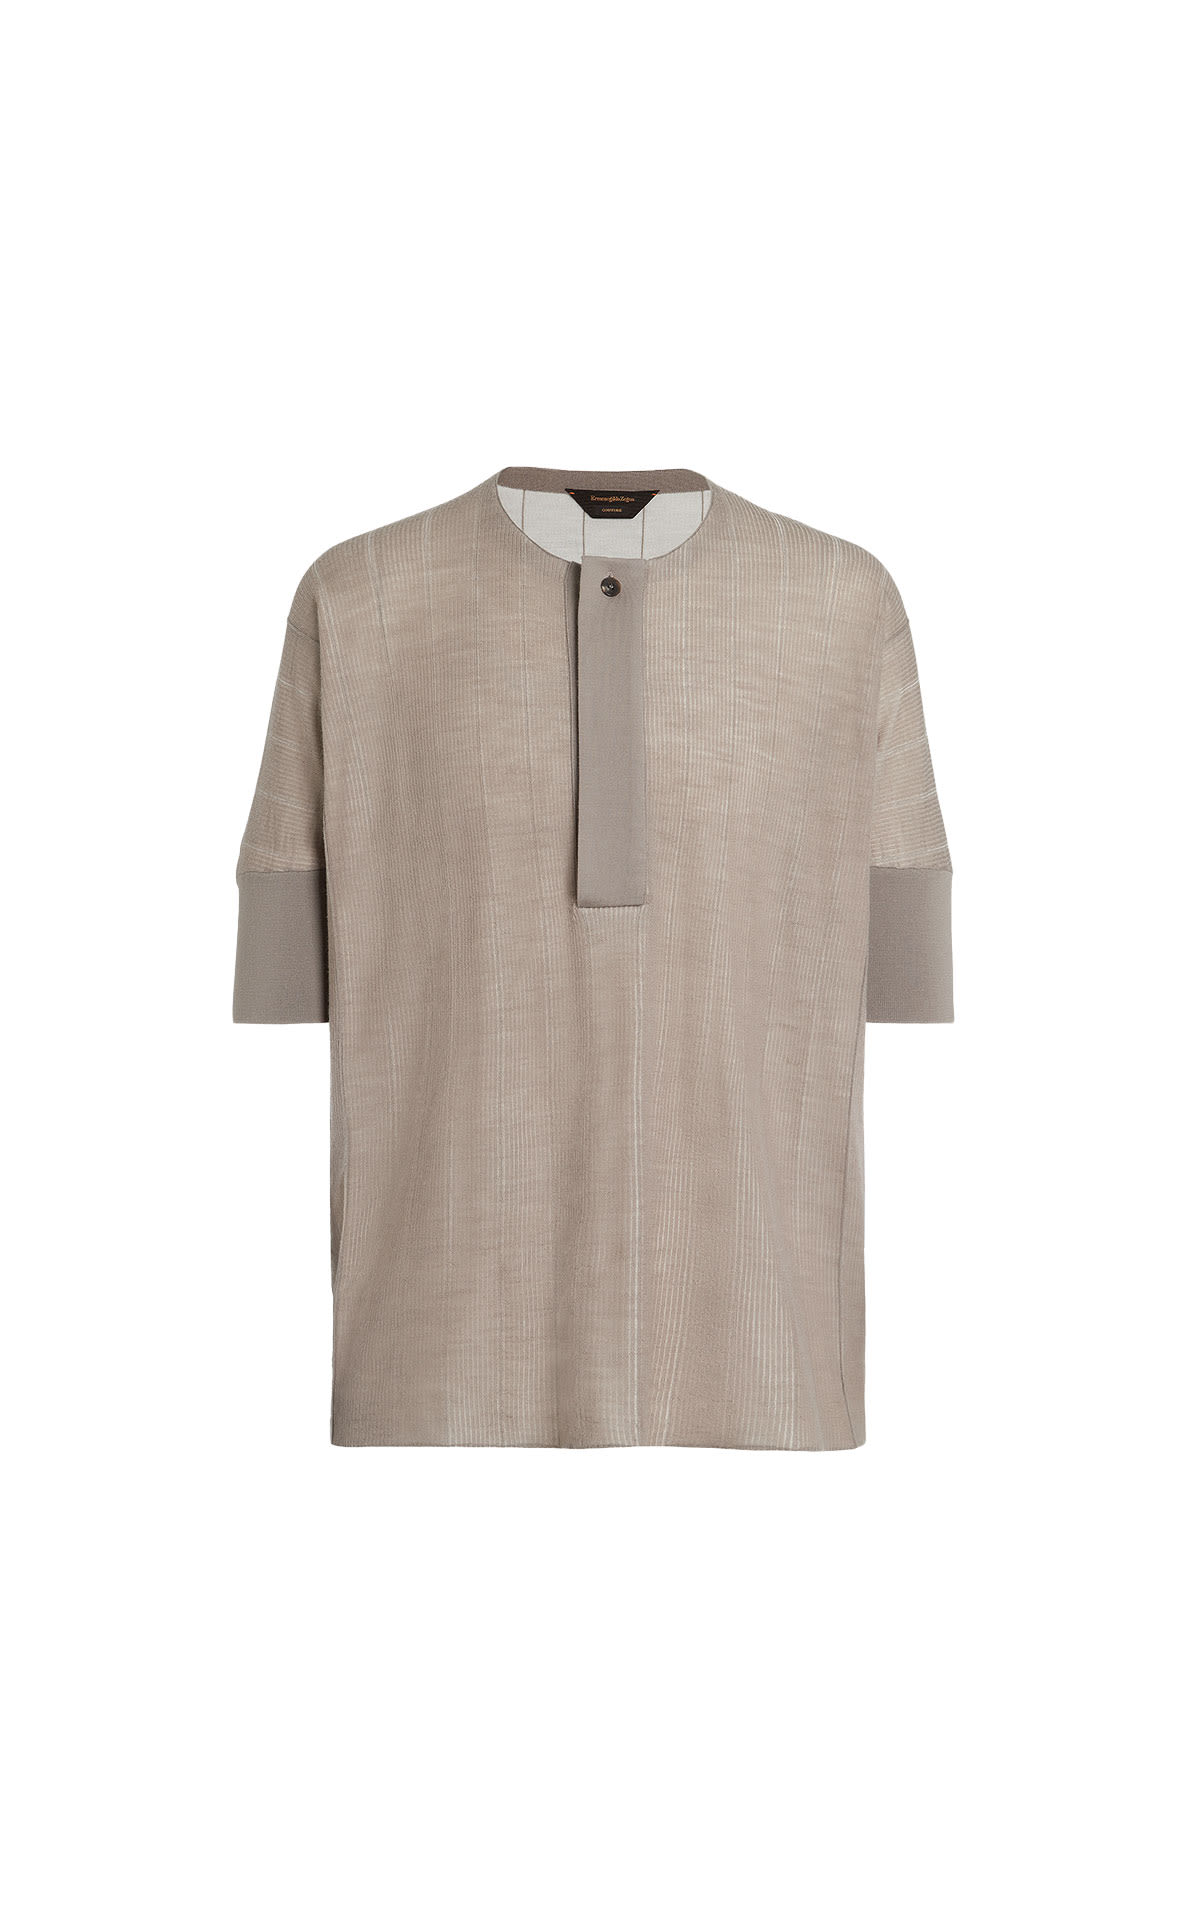 Zegna Couture shirt from Bicester Village